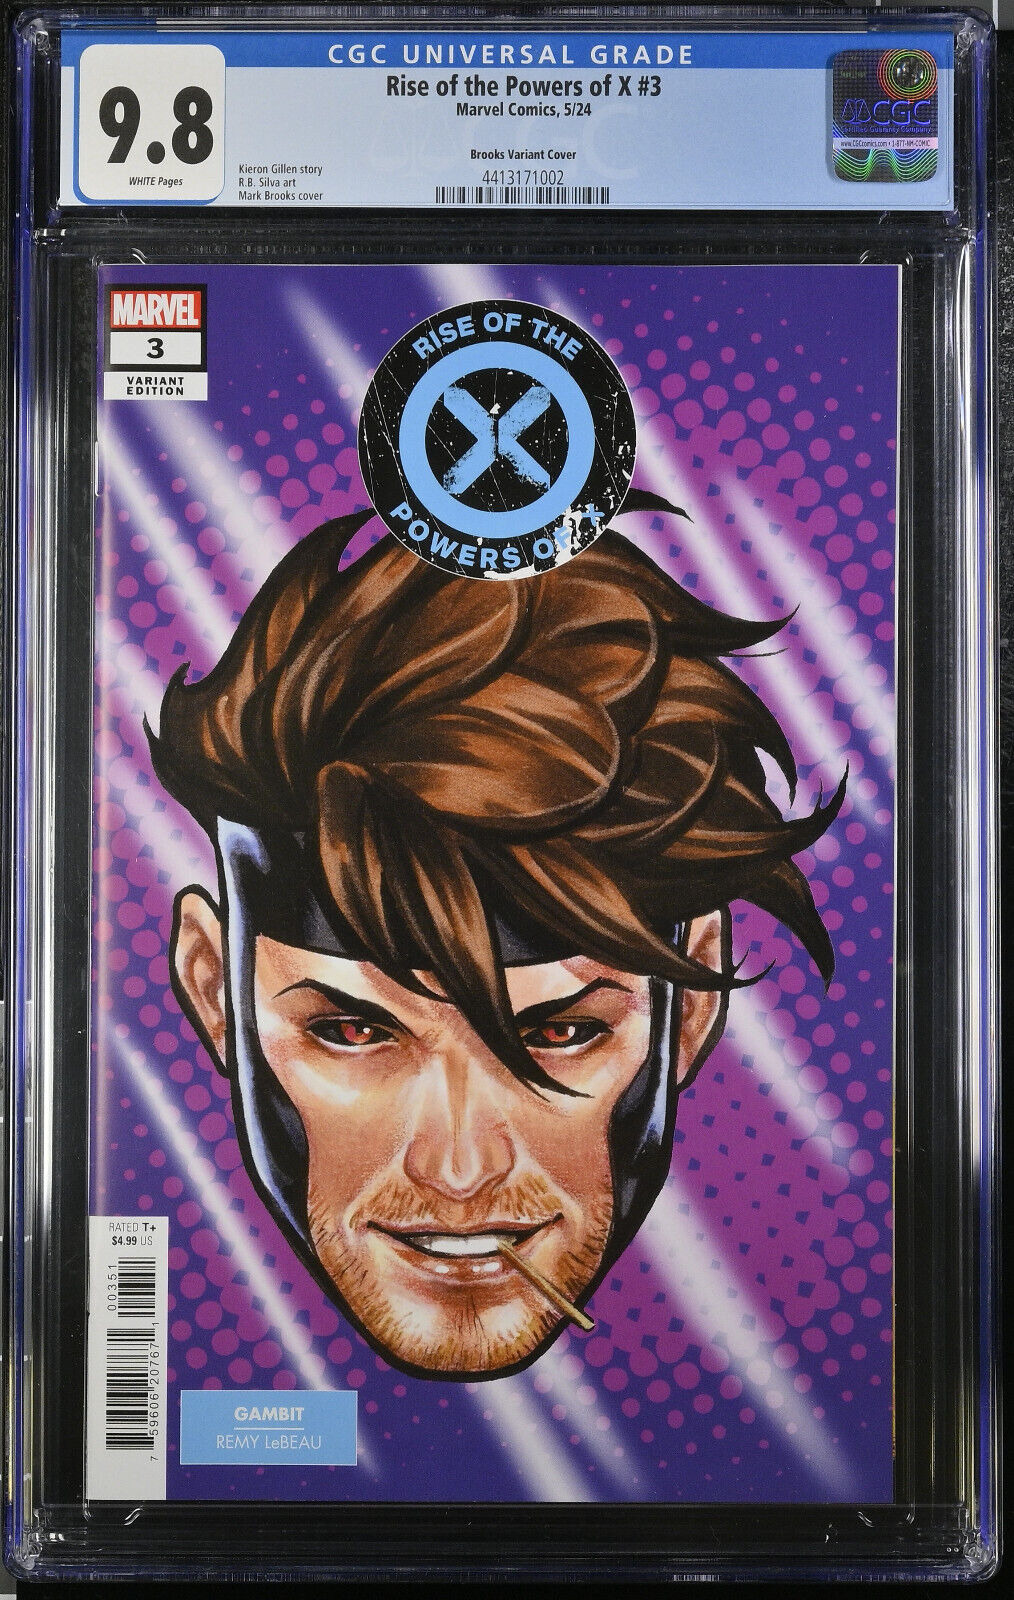 Rise of the Powers of X #3 Mark Brooks Gambit Variant CGC 9.8